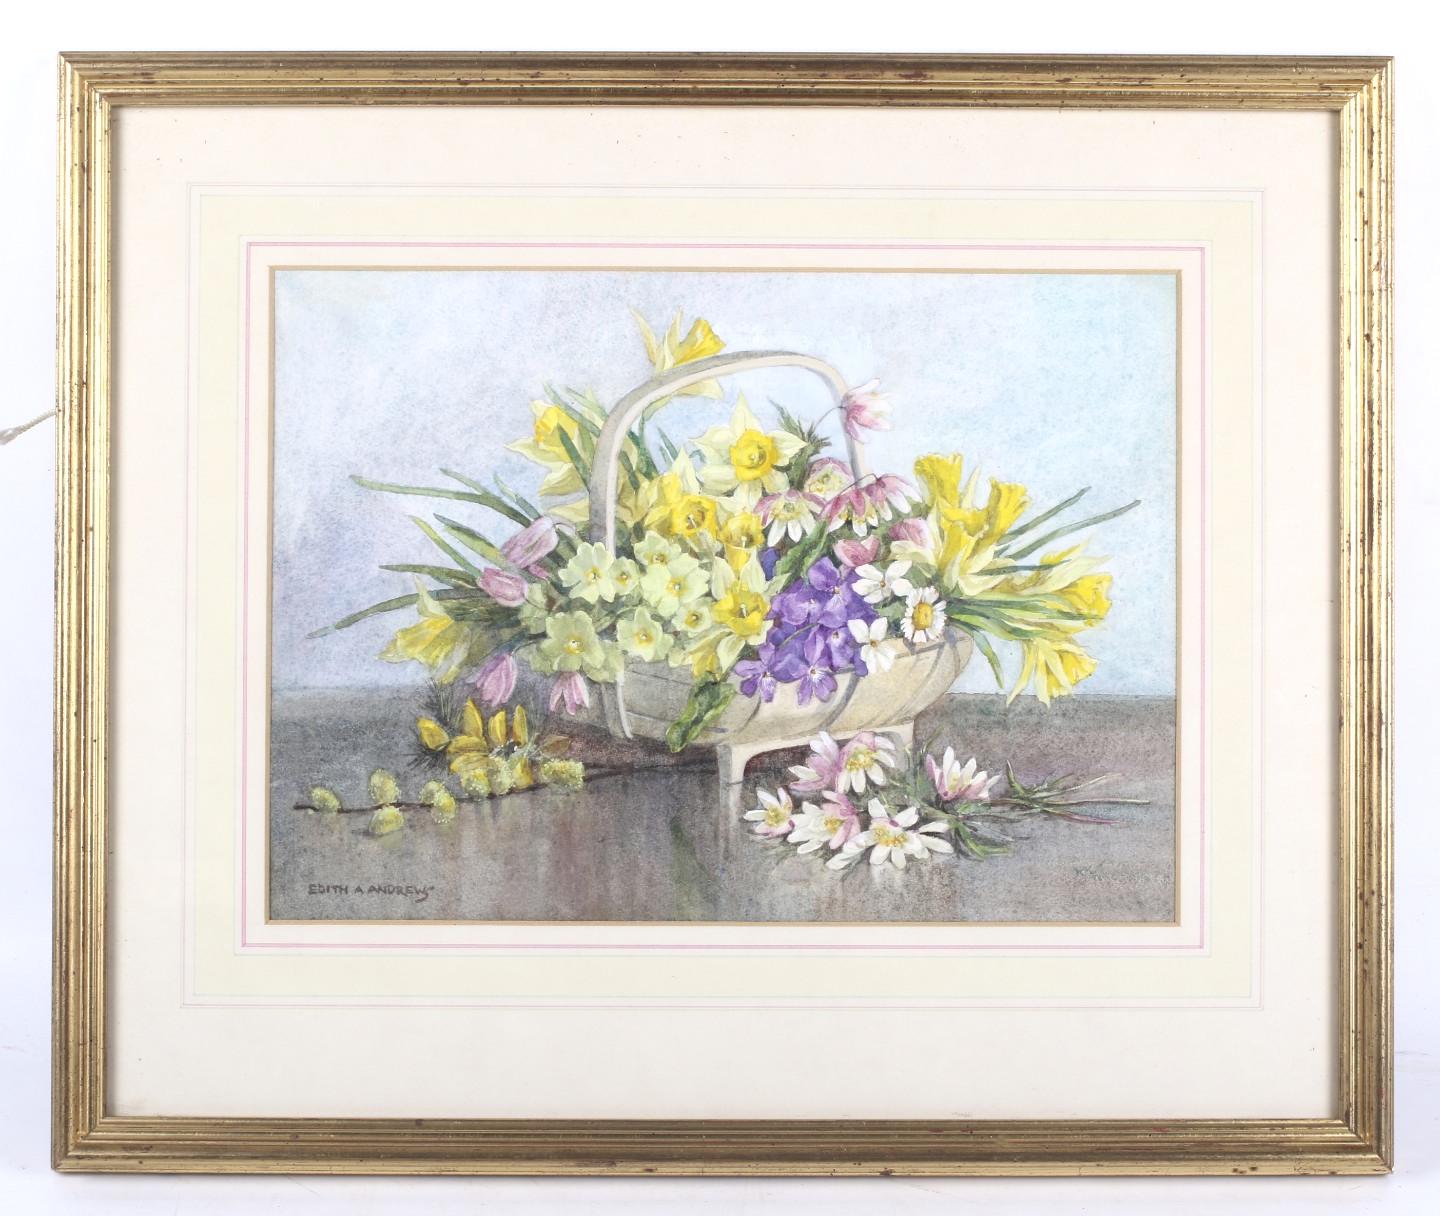 Edith Alice Andrews (exh. 1900-1940), watercolour on paper. 'A spring basketful', 25cm x 35cm. - Image 2 of 3